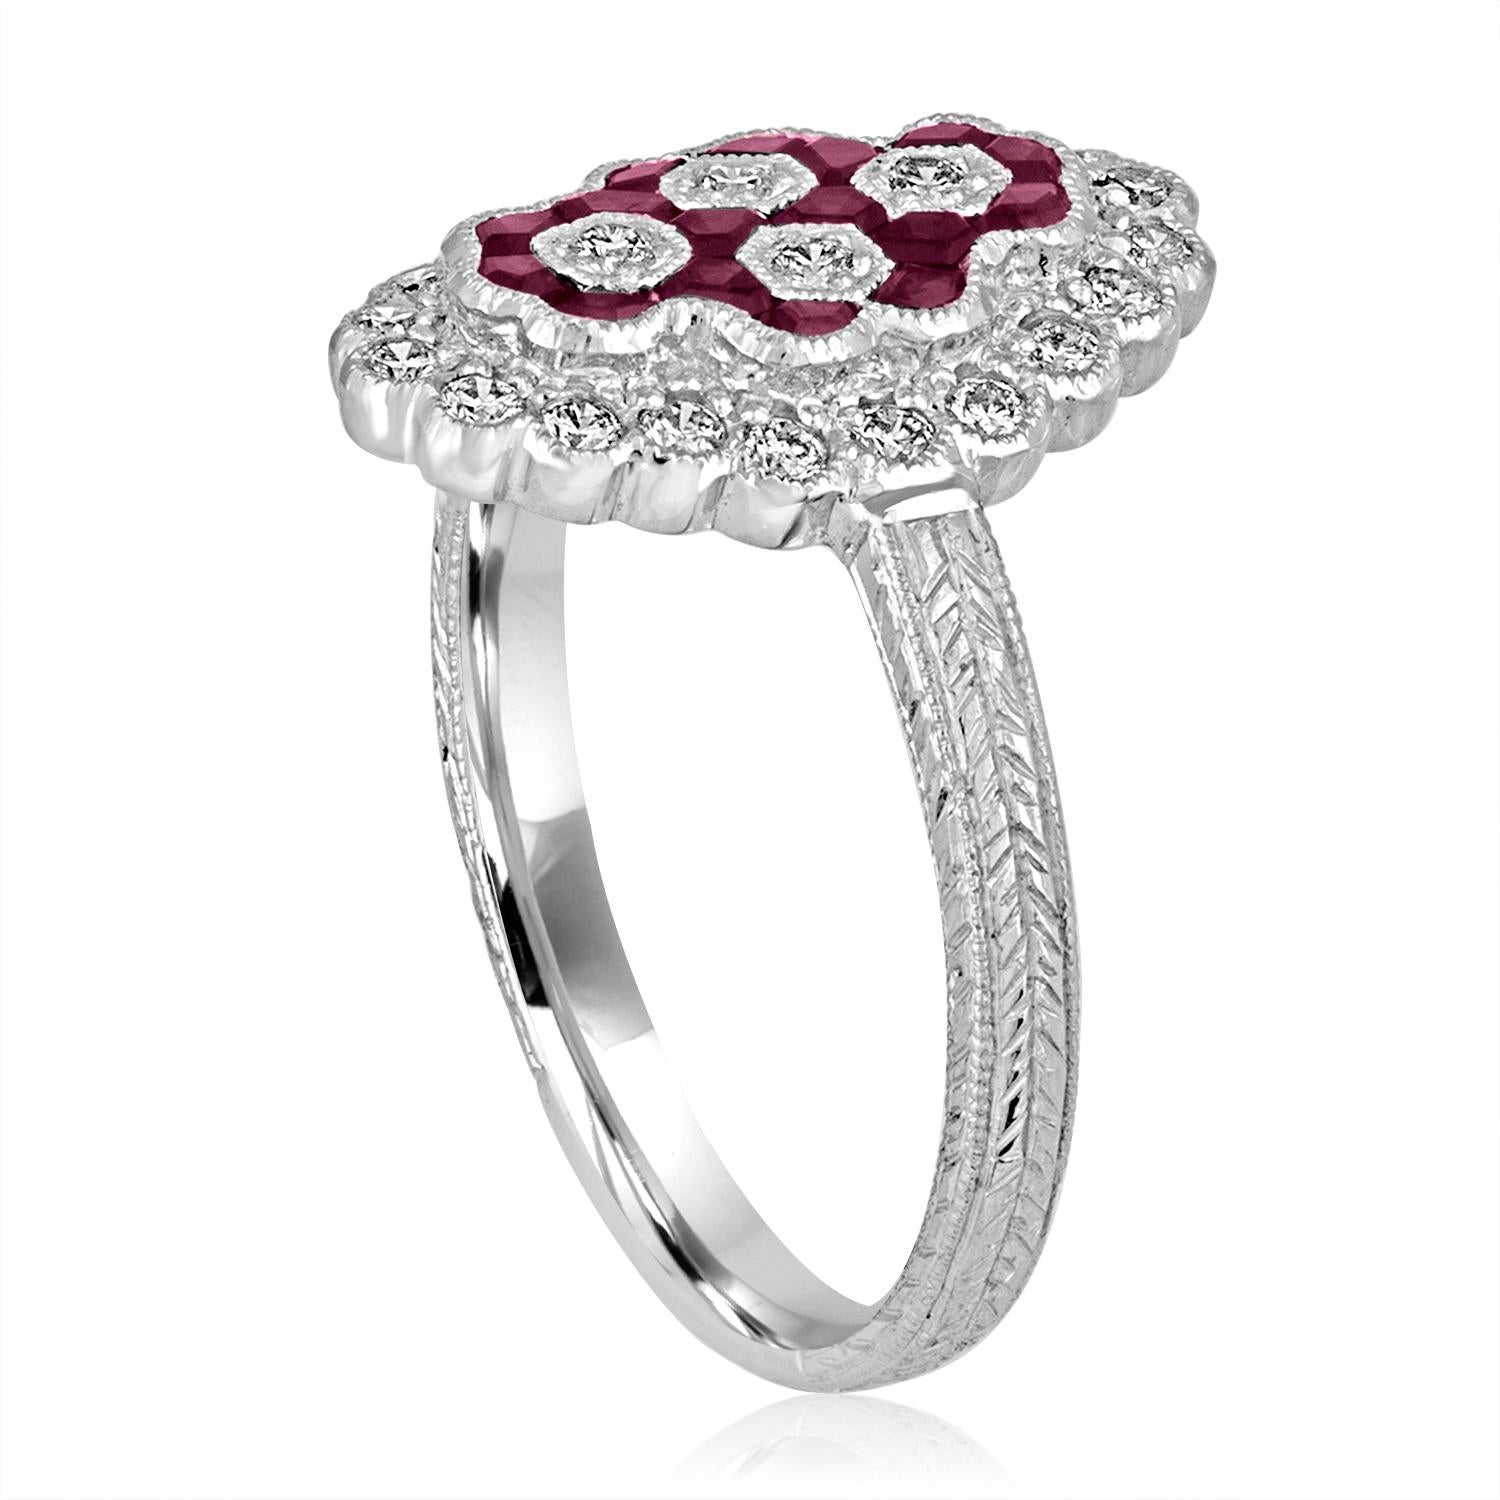 Art Deco Revival Style Ring.
The ring is 18K White Gold.
There are 0.50 Carats in Diamonds H SI.
There are 0.30 Carats in Rubies.
The ring is a size 6.75, sizable.
The ring measures 10/16